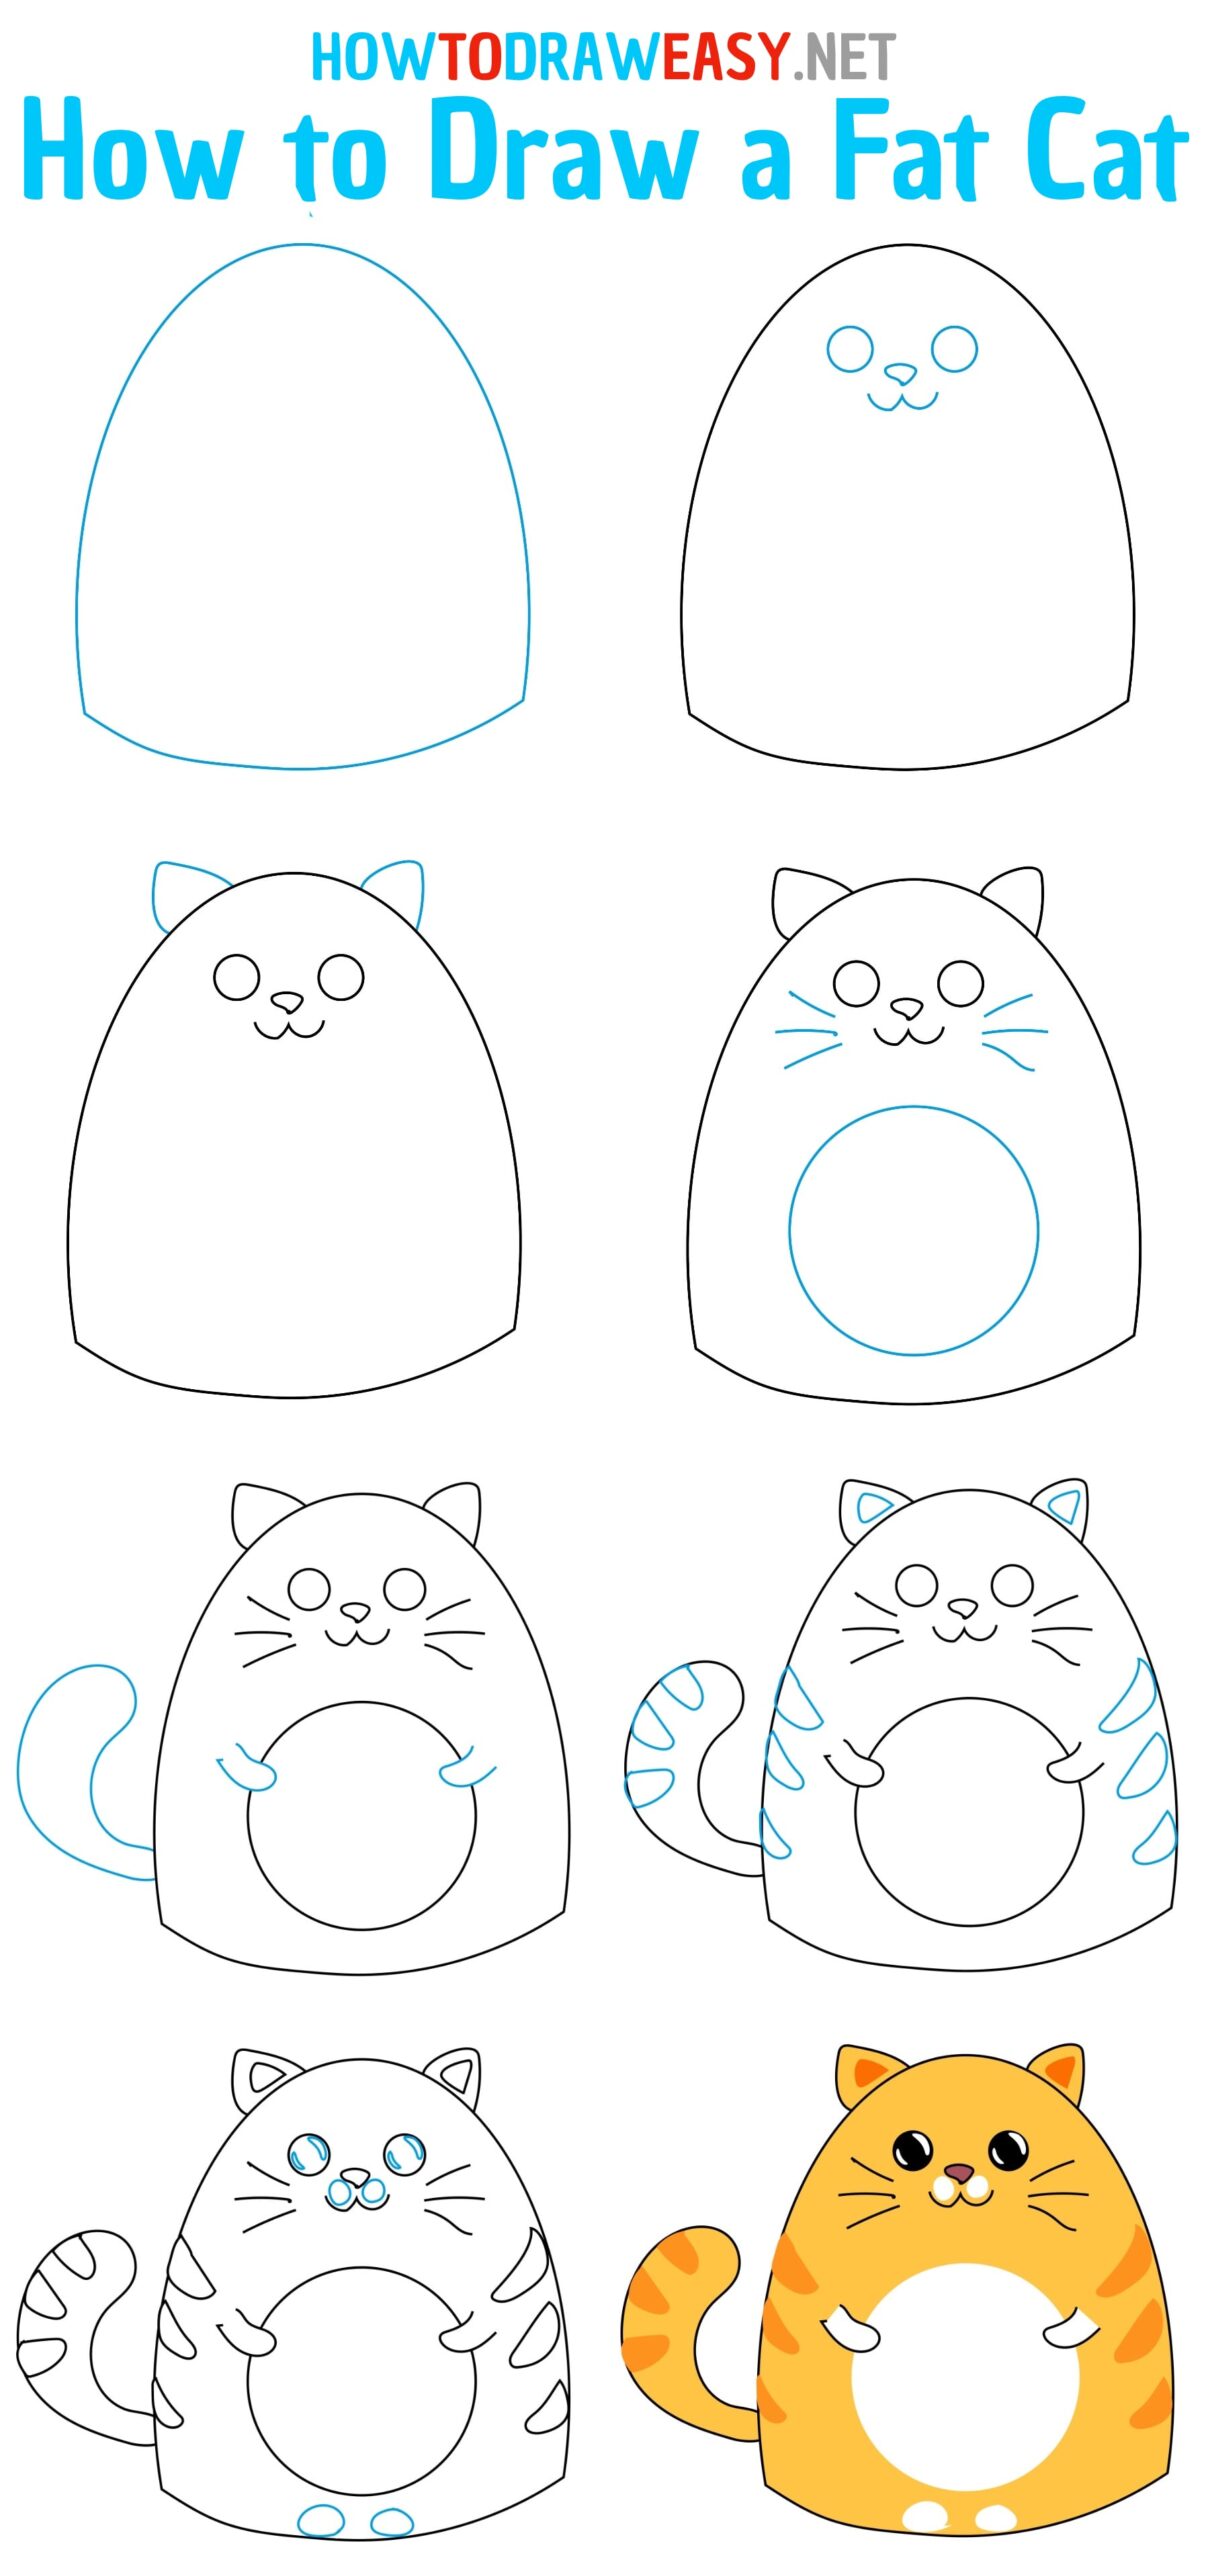 How to Draw a Fat Cat Step by Step